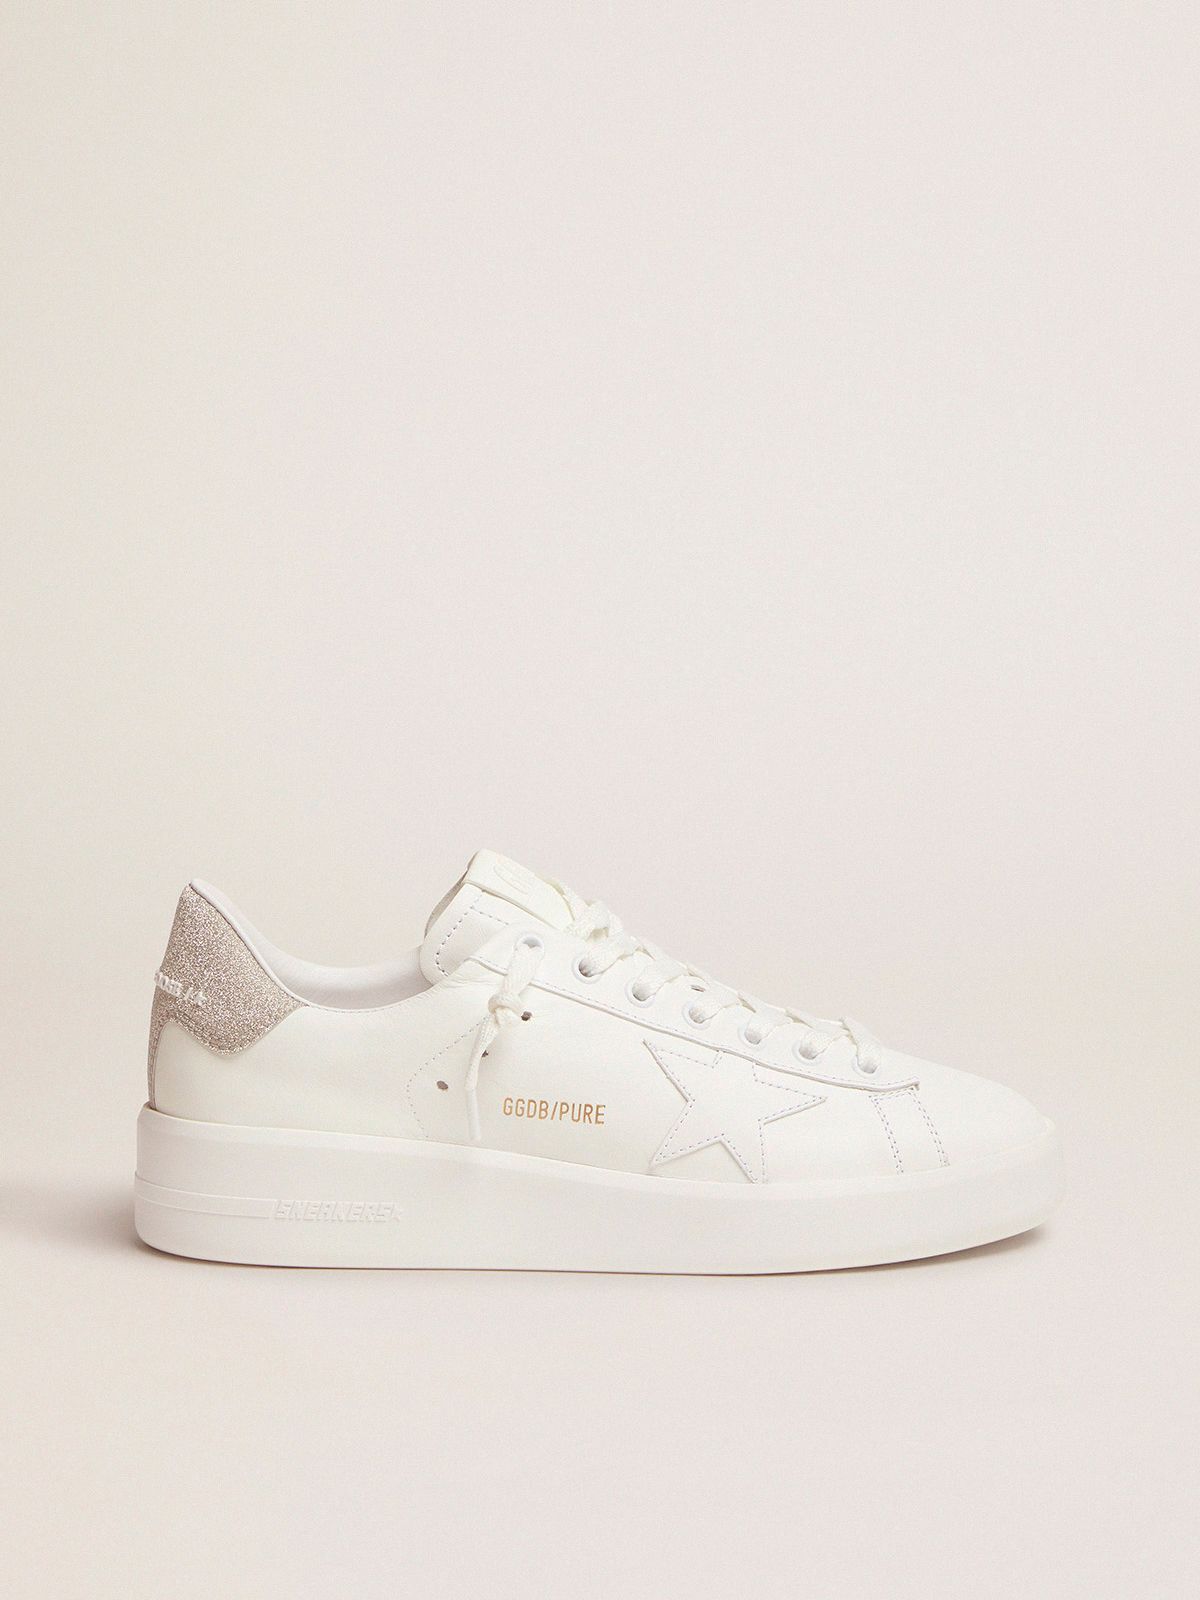 golden goose in champagne tab glitter white sneakers Purestar leather with heel